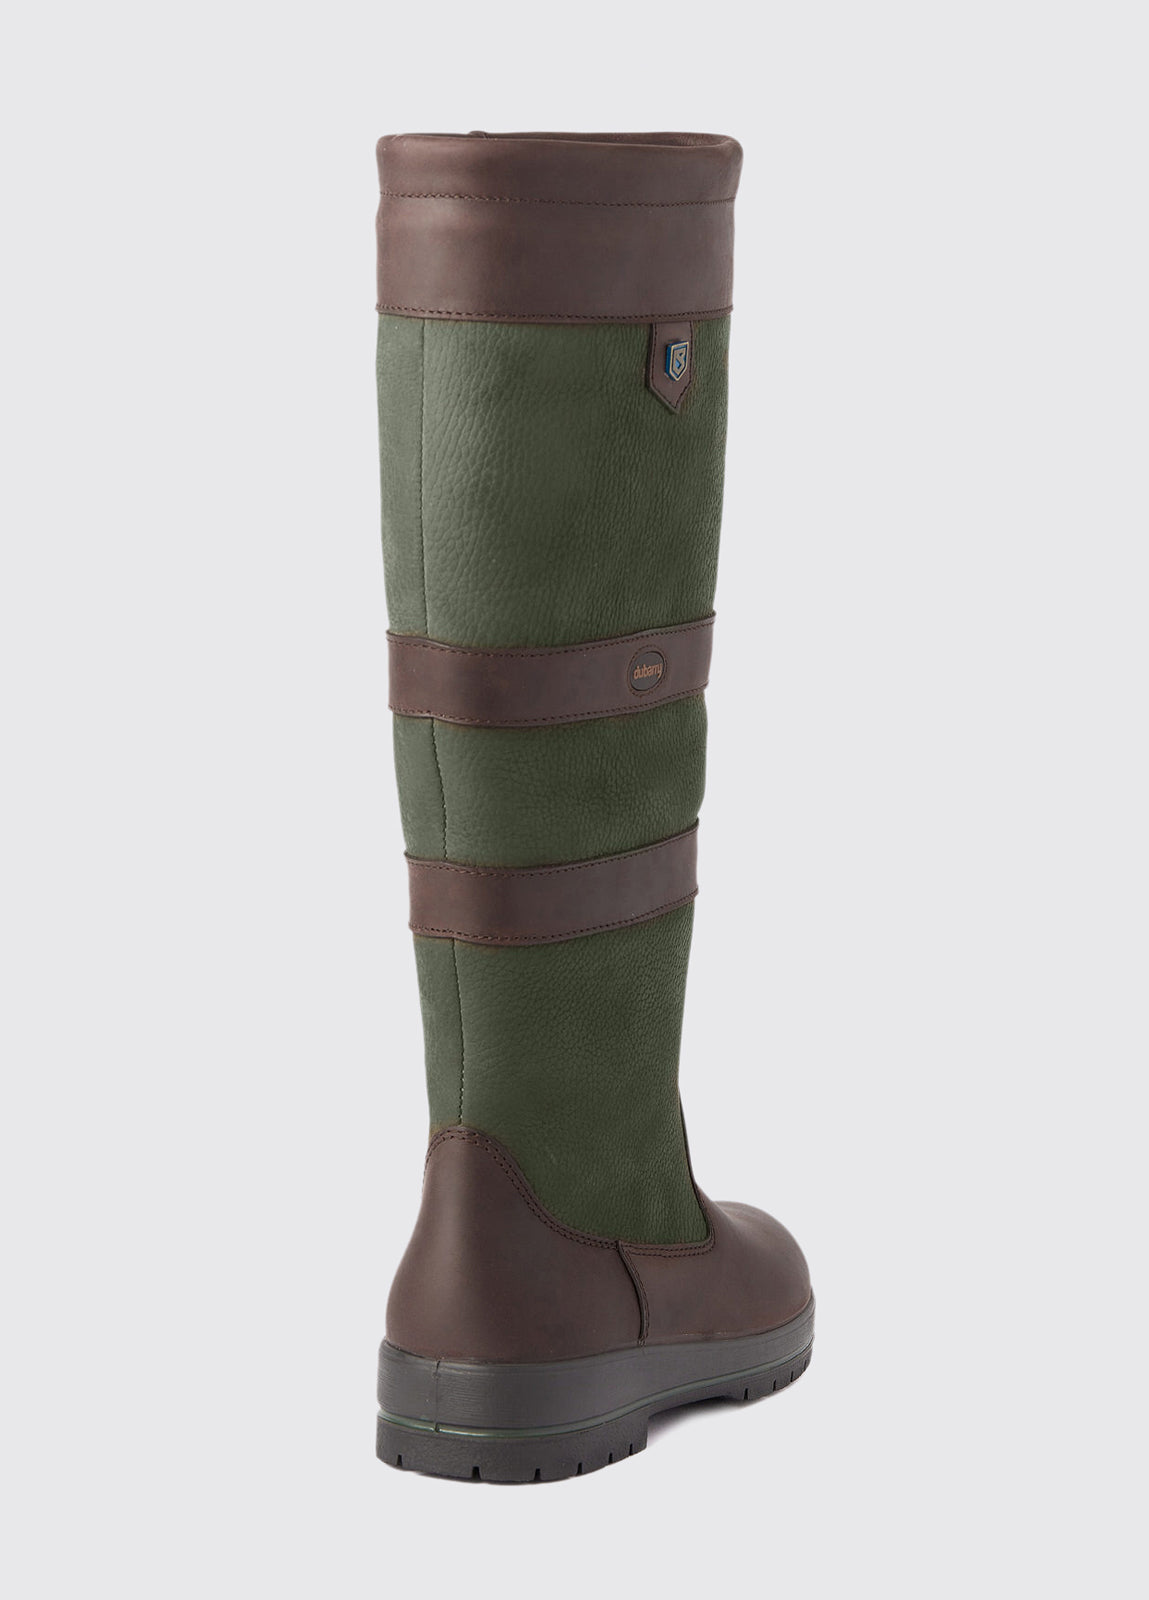 Dubarry Womens Galway Country Boot - Ivy